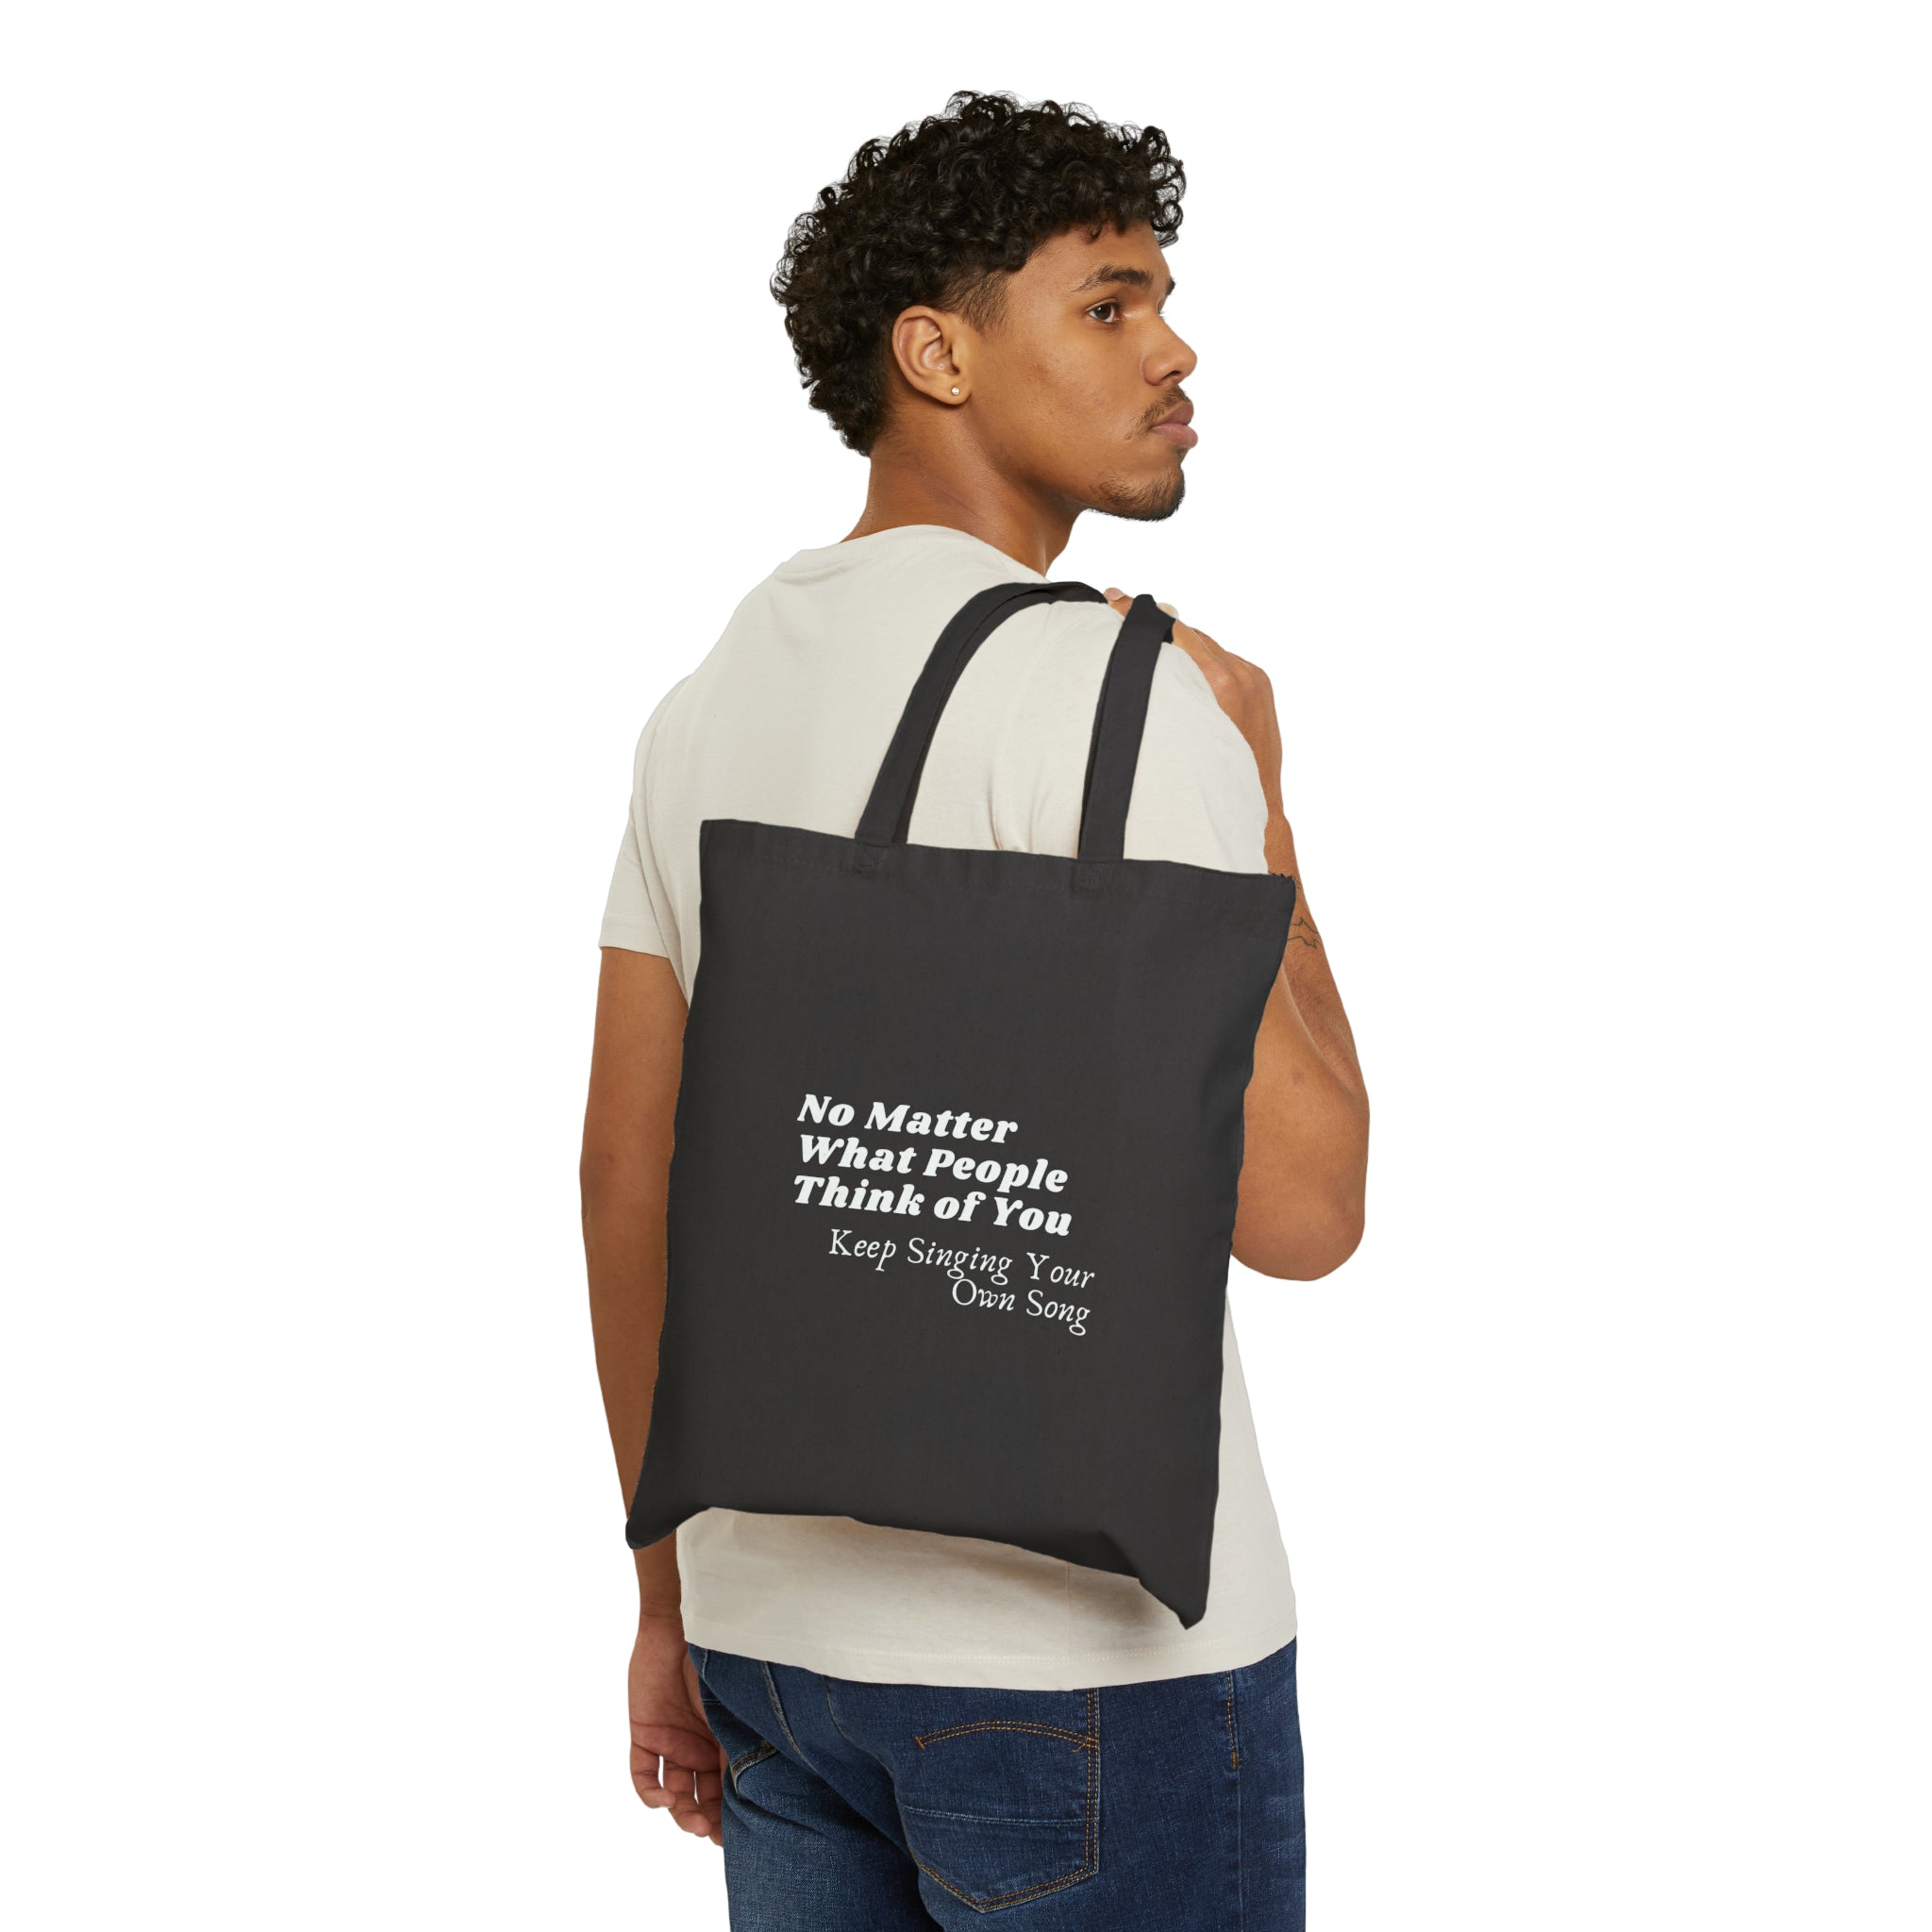 Your Own Song | Cotton Canvas Tote Bag